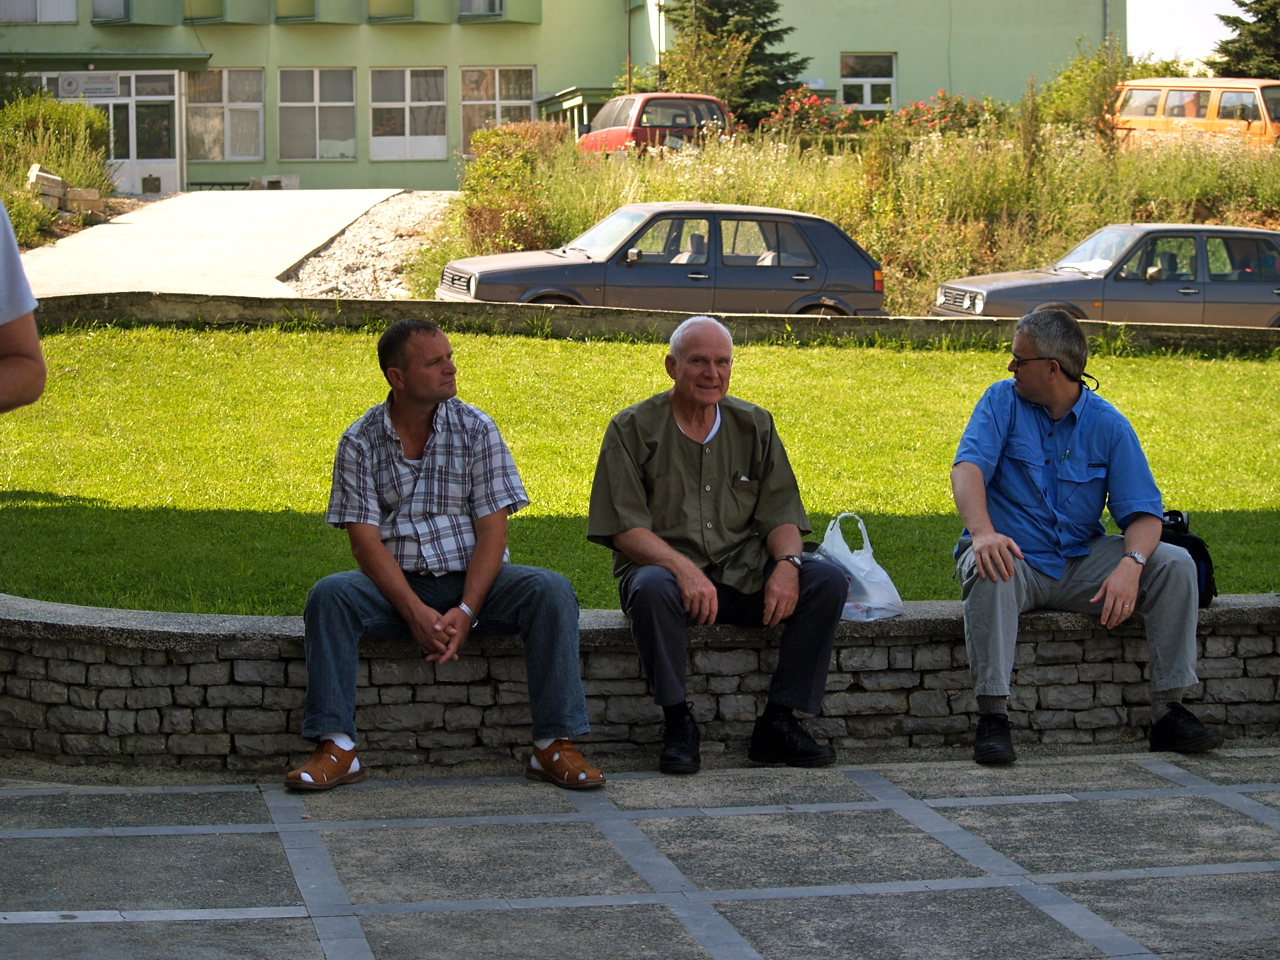 four men sitting on the side walk with bags and a car in background